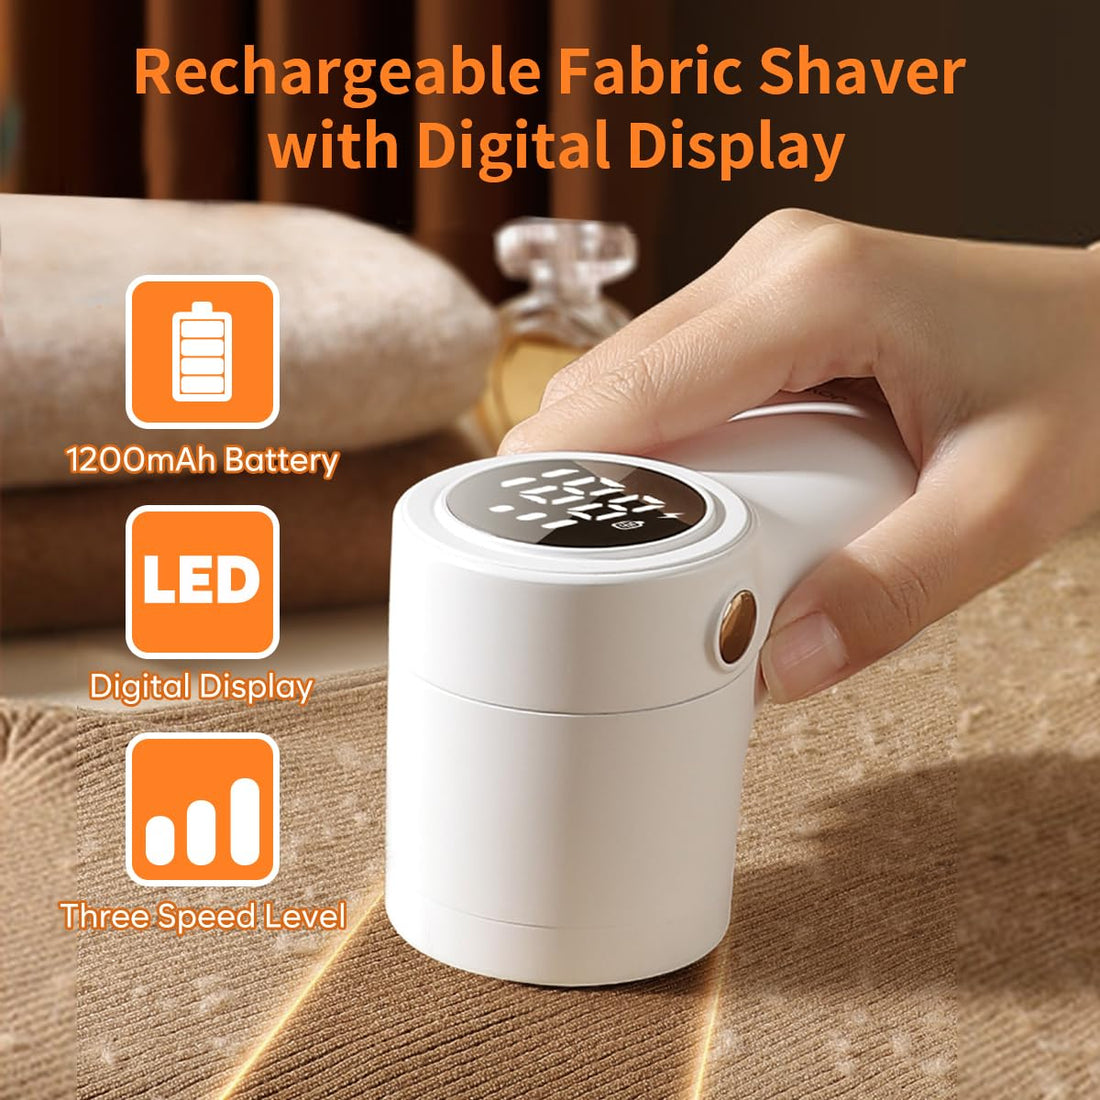 Rechargeable Fabric Shaver, coldSky Lint Remover for Clothes with Digital Display, Electric Lint Shaver with 6-Leaf Blades, 3-Speeds Defuzzer for Removing Fuzz and Pill from Sweater, Furniture (1Pcs)